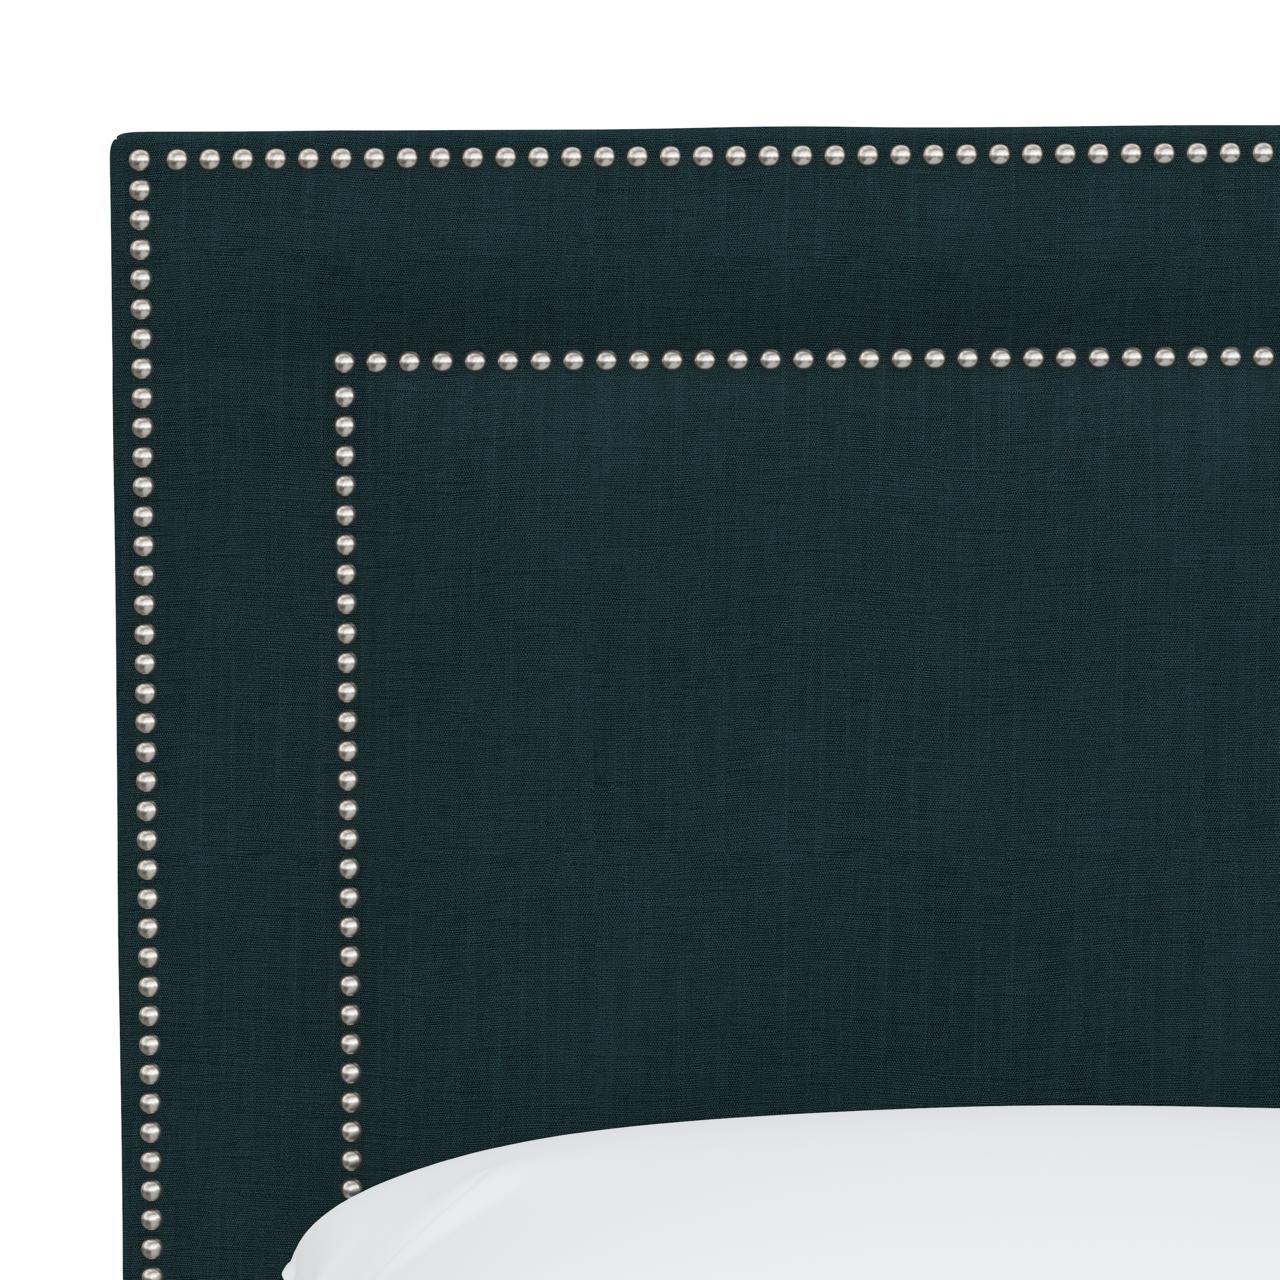 Williams Bed, Queen, Linen Conifer Green, Pewter Nailheads - Image 3